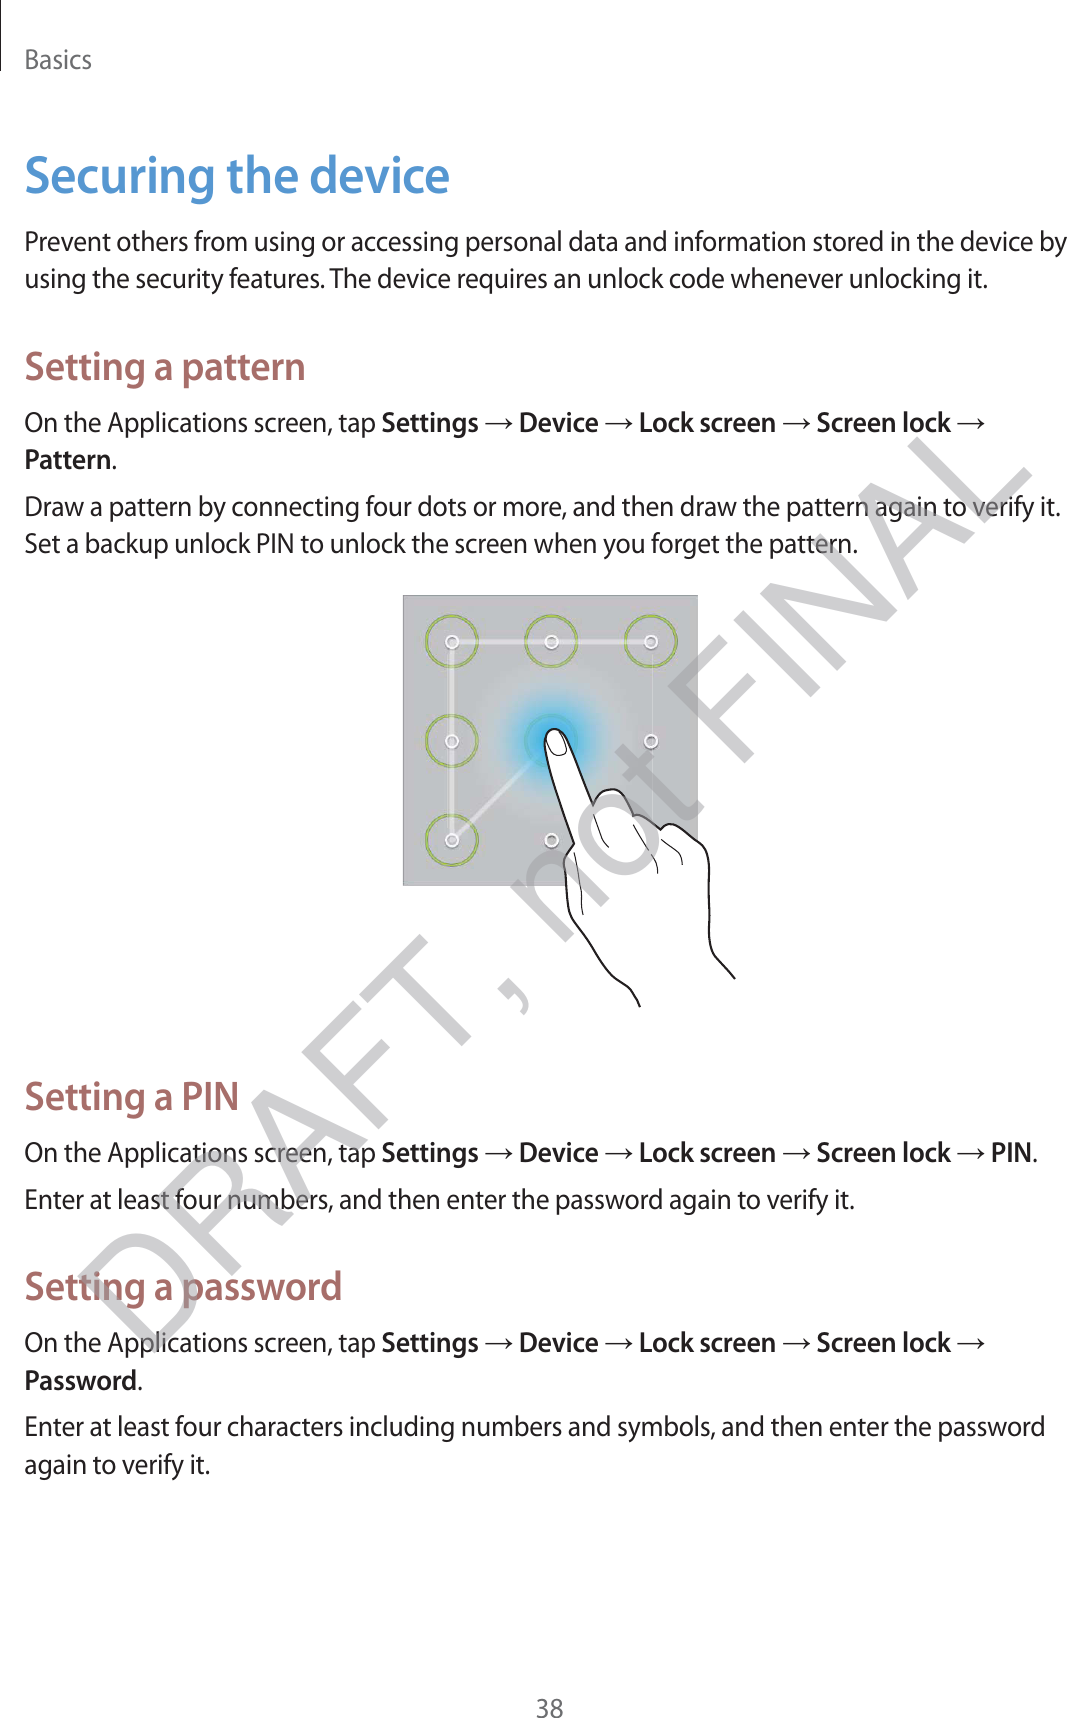 Basics38Securing the devicePrevent others from using or accessing personal data and information stored in the device by using the security features. The device requires an unlock code whenever unlocking it.Setting a patternOn the Applications screen, tap Settings → Device → Lock screen → Screen lock → Pattern.Draw a pattern by connecting four dots or more, and then draw the pattern again to verify it. Set a backup unlock PIN to unlock the screen when you forget the pattern.Setting a PINOn the Applications screen, tap Settings → Device → Lock screen → Screen lock → PIN.Enter at least four numbers, and then enter the password again to verify it.Setting a passwordOn the Applications screen, tap Settings → Device → Lock screen → Screen lock → Password.Enter at least four characters including numbers and symbols, and then enter the password again to verify it.DRAFT, not FINAL